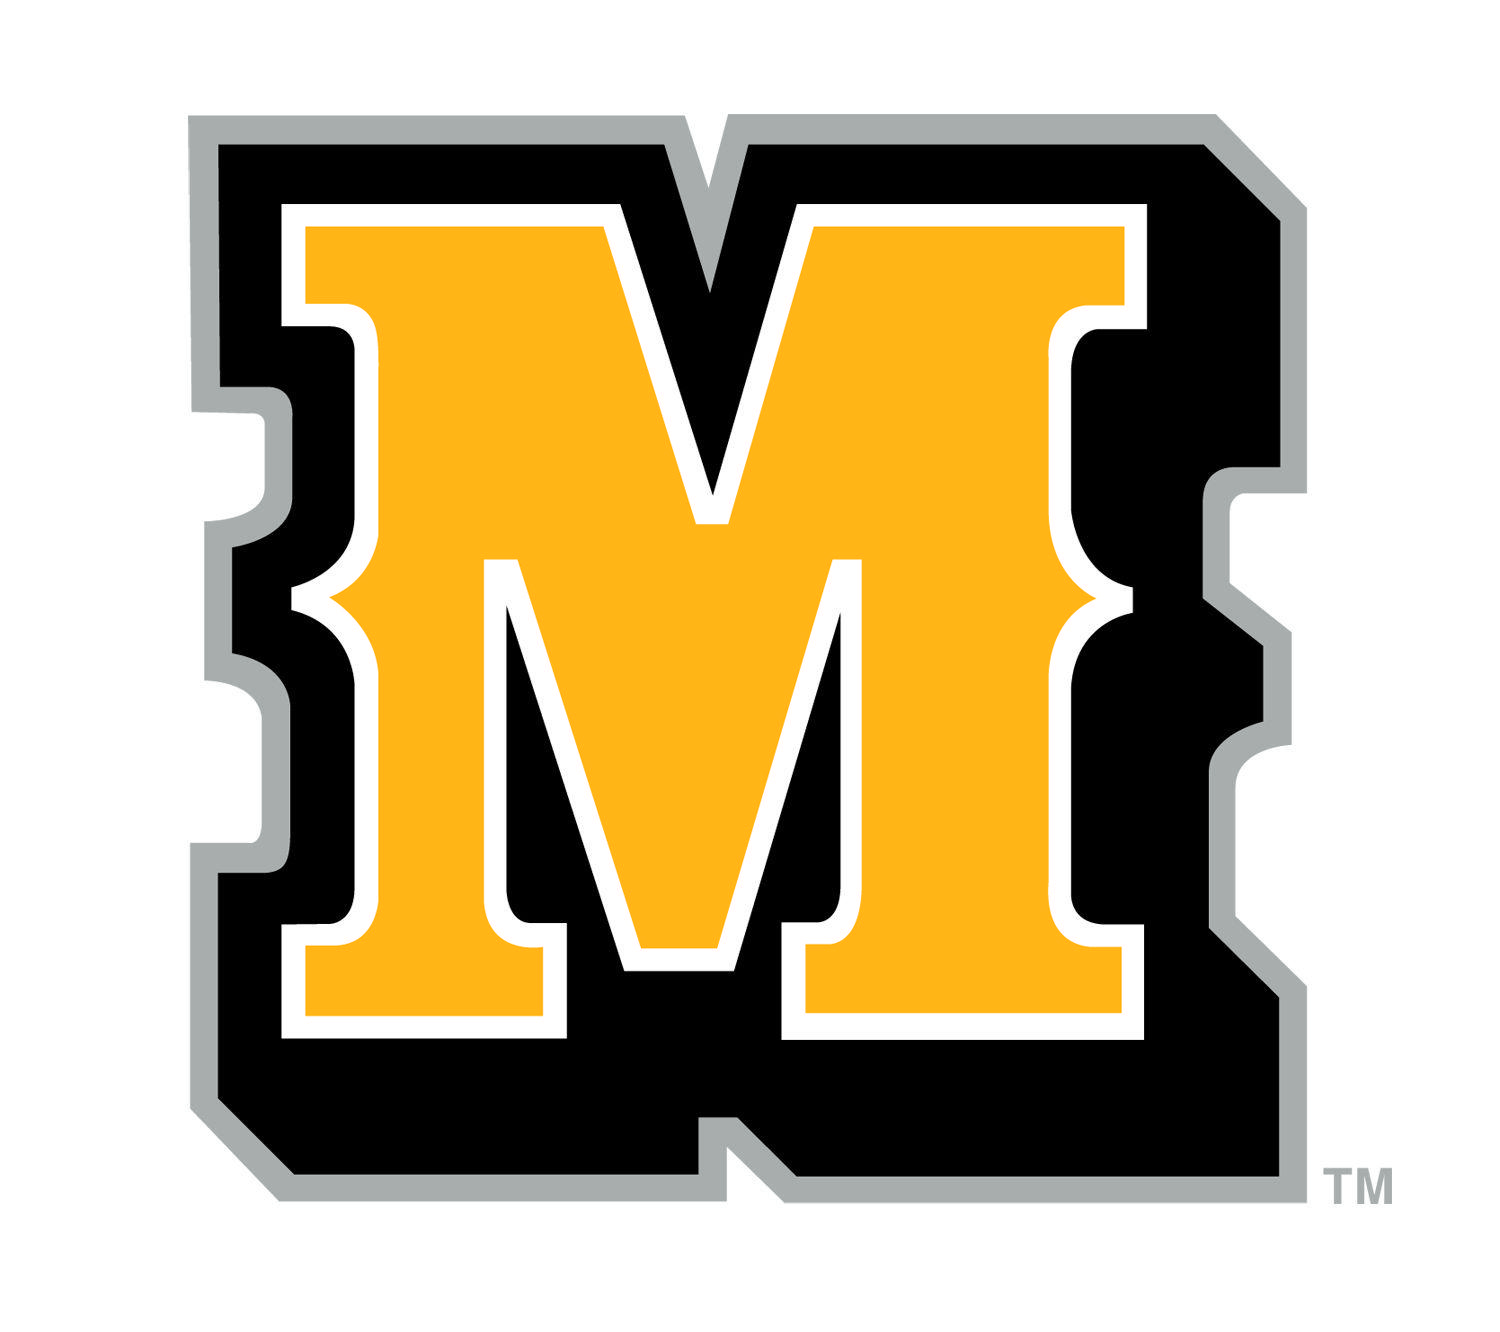 Yellow M Logo - Our New Madisonville Miner Logos Are Here! | Madisonville Miners ...